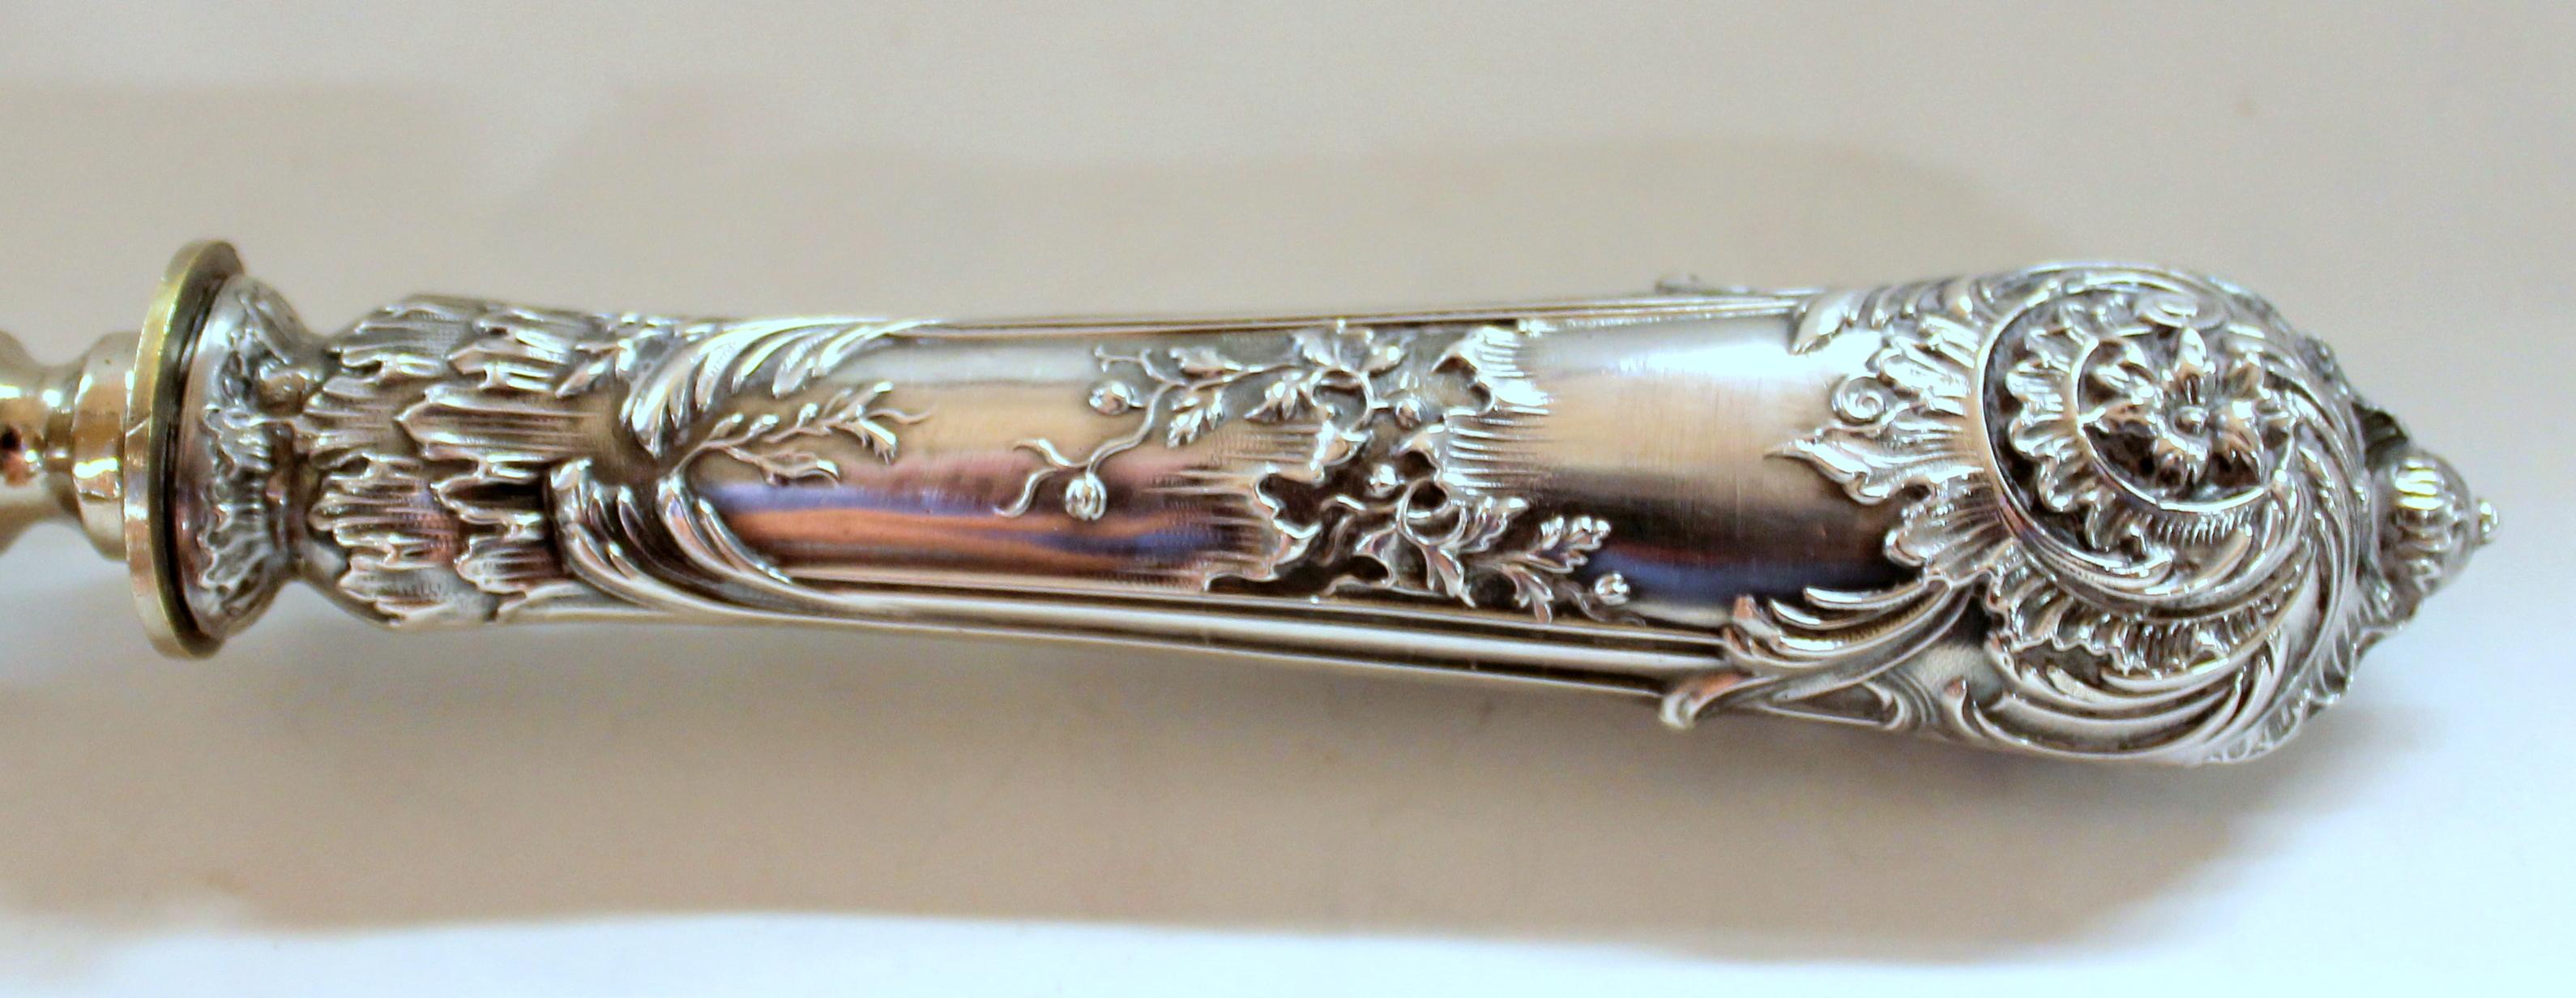 Antique French .950 Silver Rococo Style 3 Pc Carving Set with Rare Gigot For Sale 7